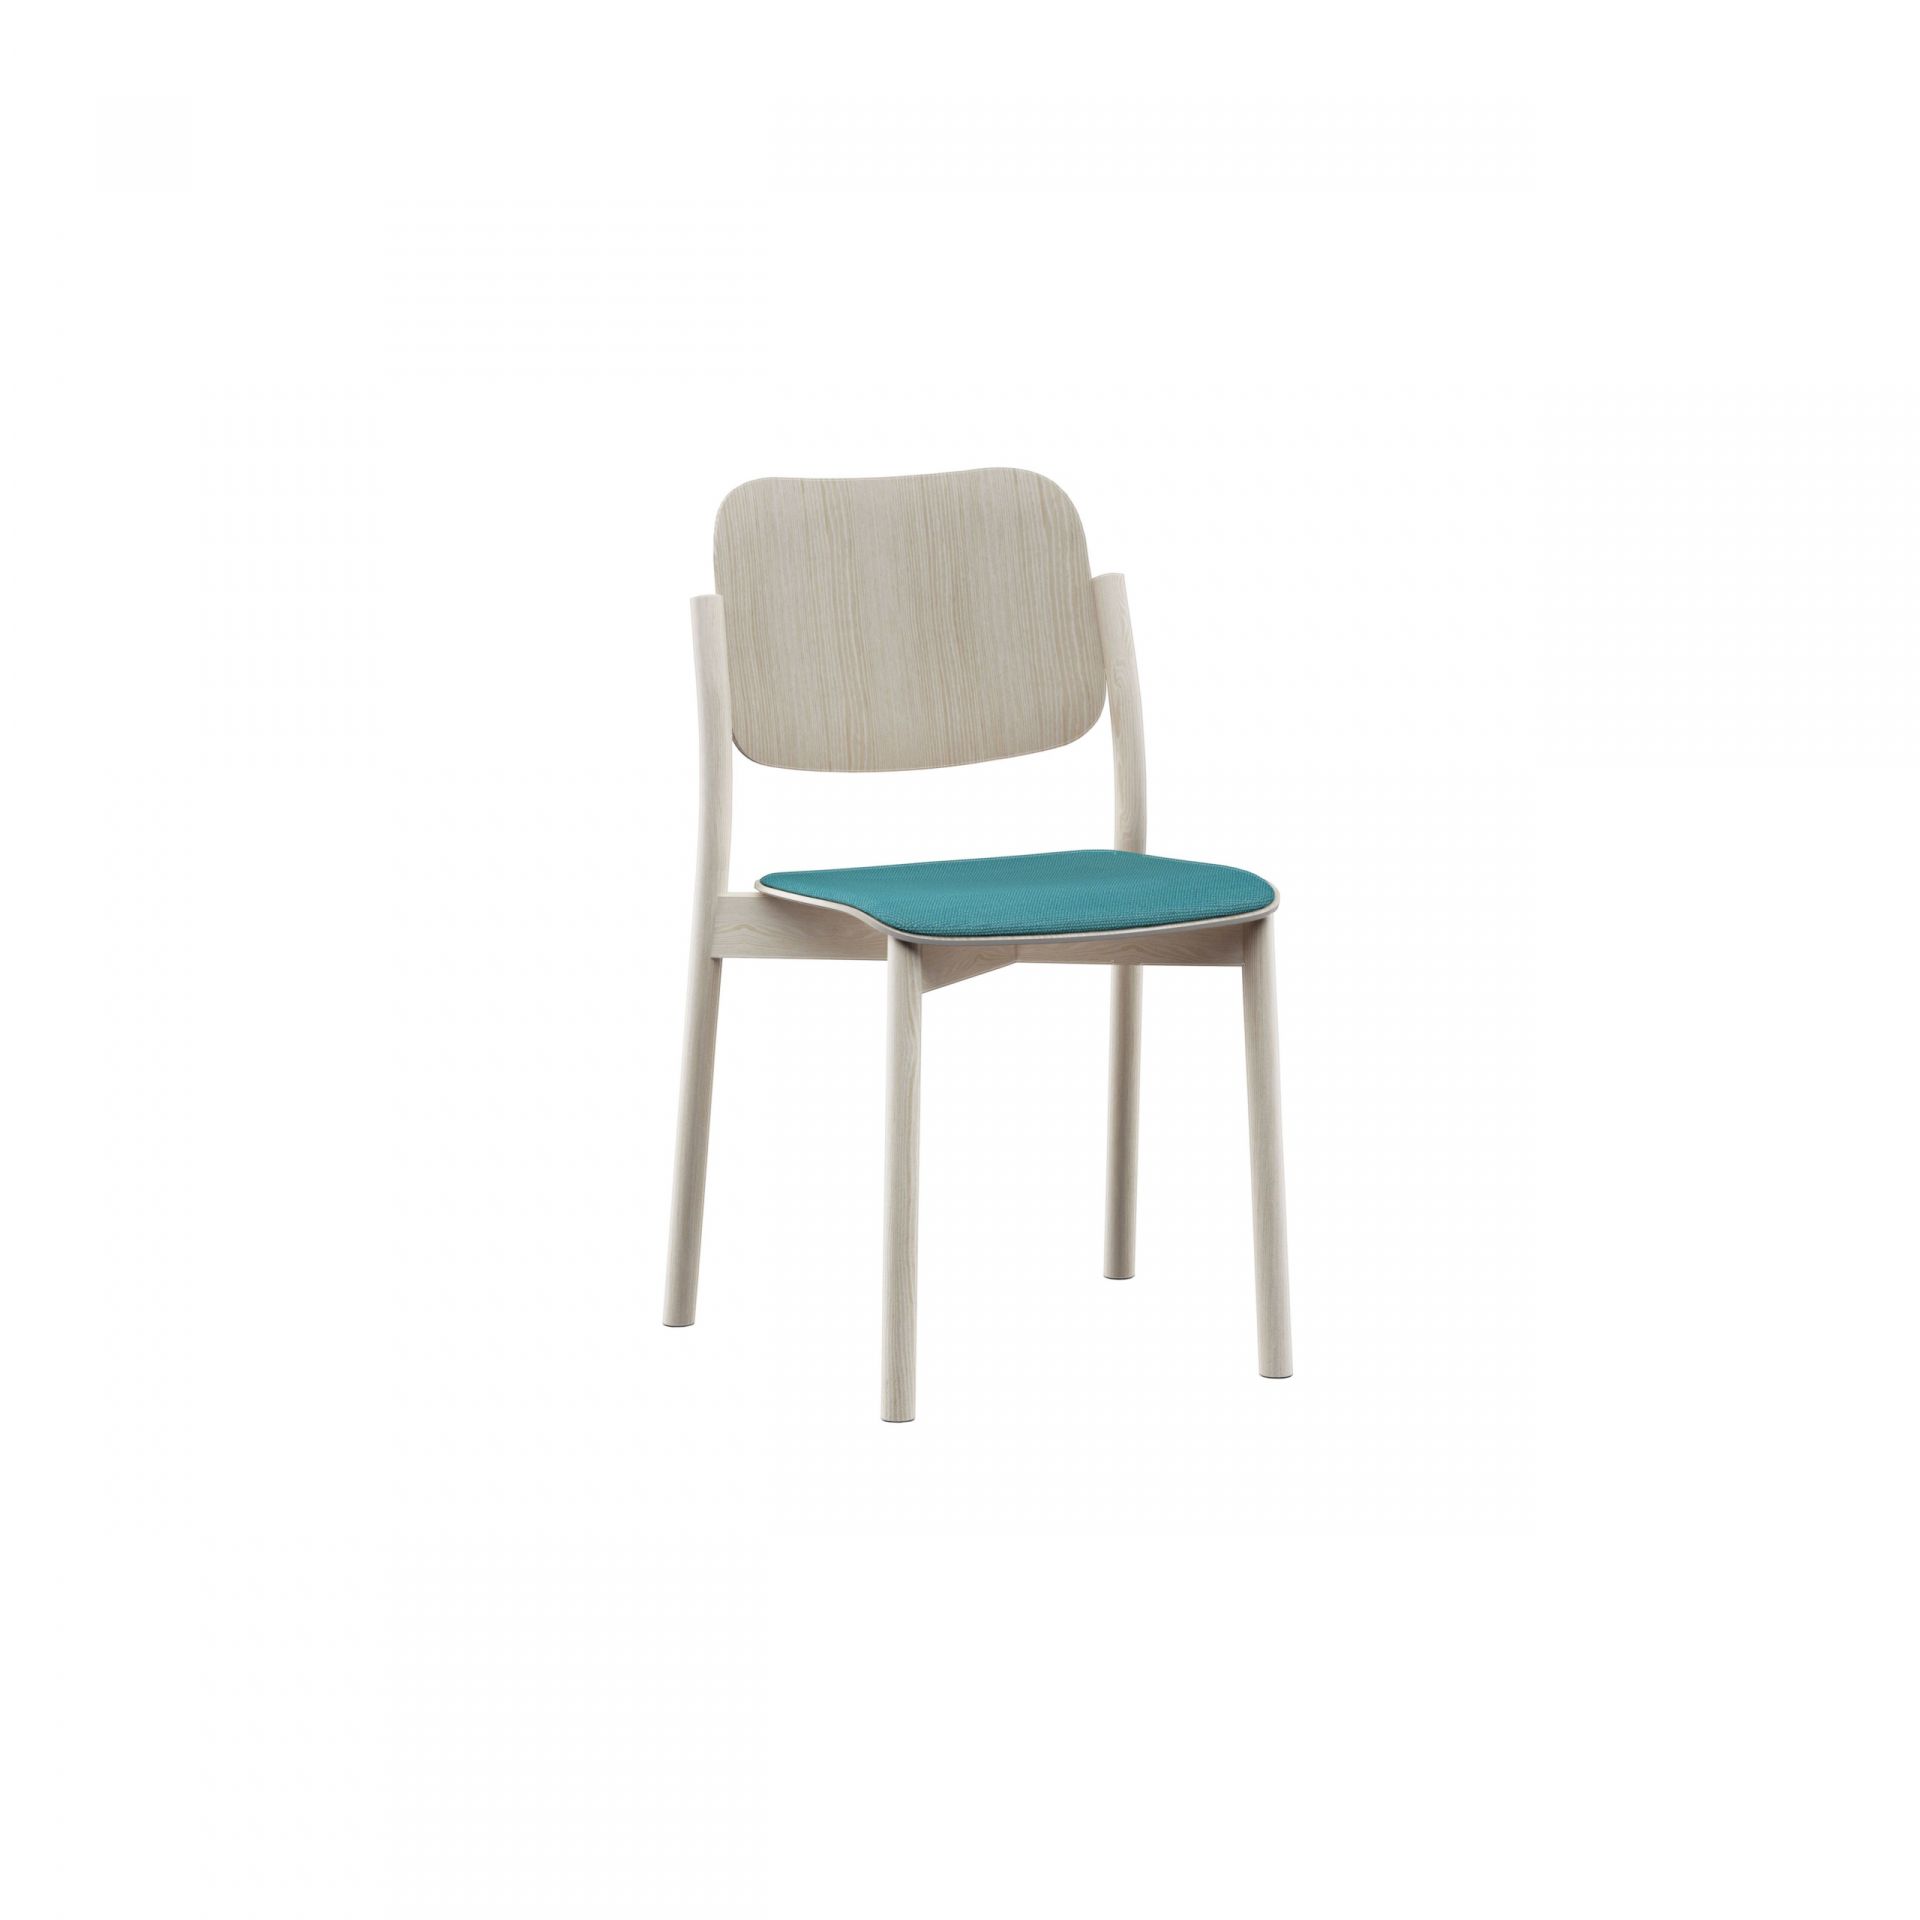 Zoe Wooden chair product image 5